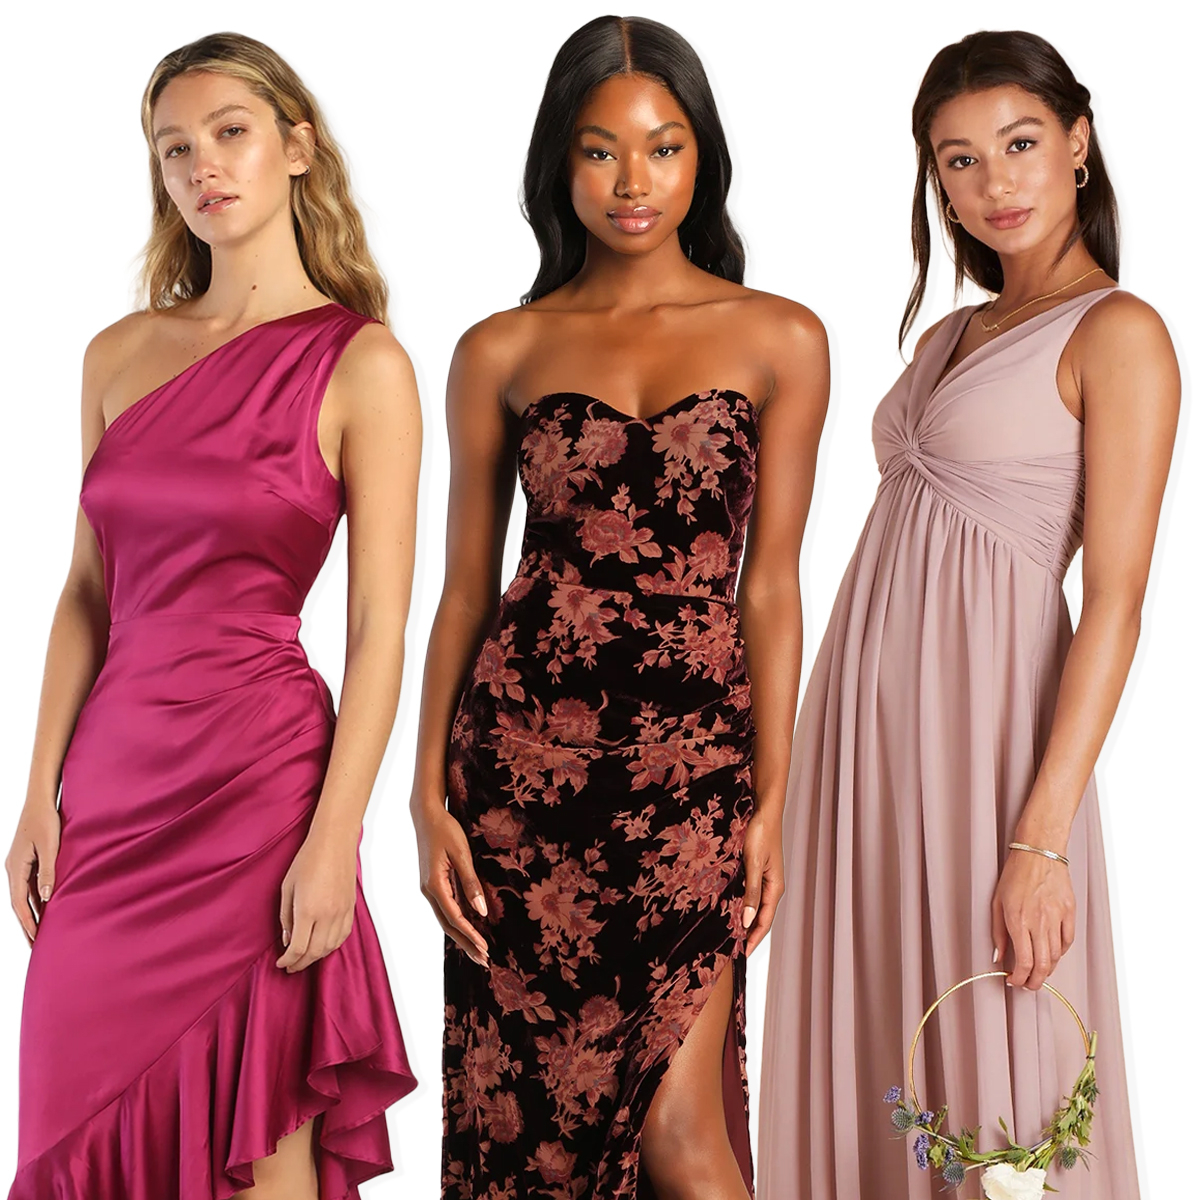 Nordstrom Rack Has Tons of Wedding Guest Looks for Less